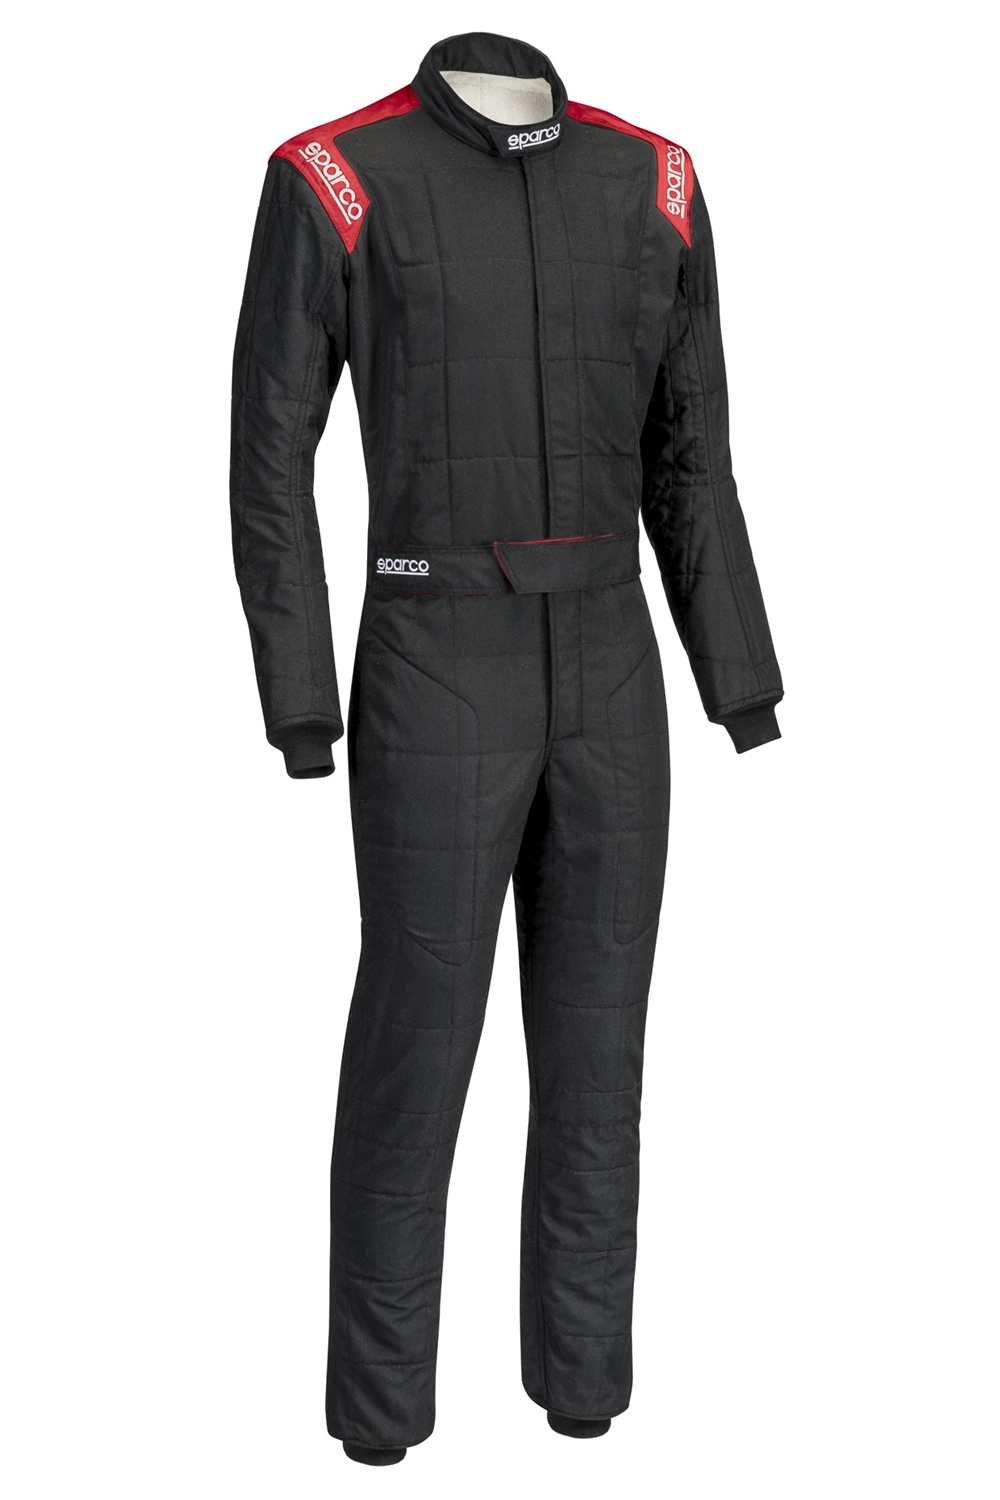 SPARCO Suit Conquest 2.0 Driving 1 Piece SFI 3.2A/5 FIA Approved Dual Layer Fire